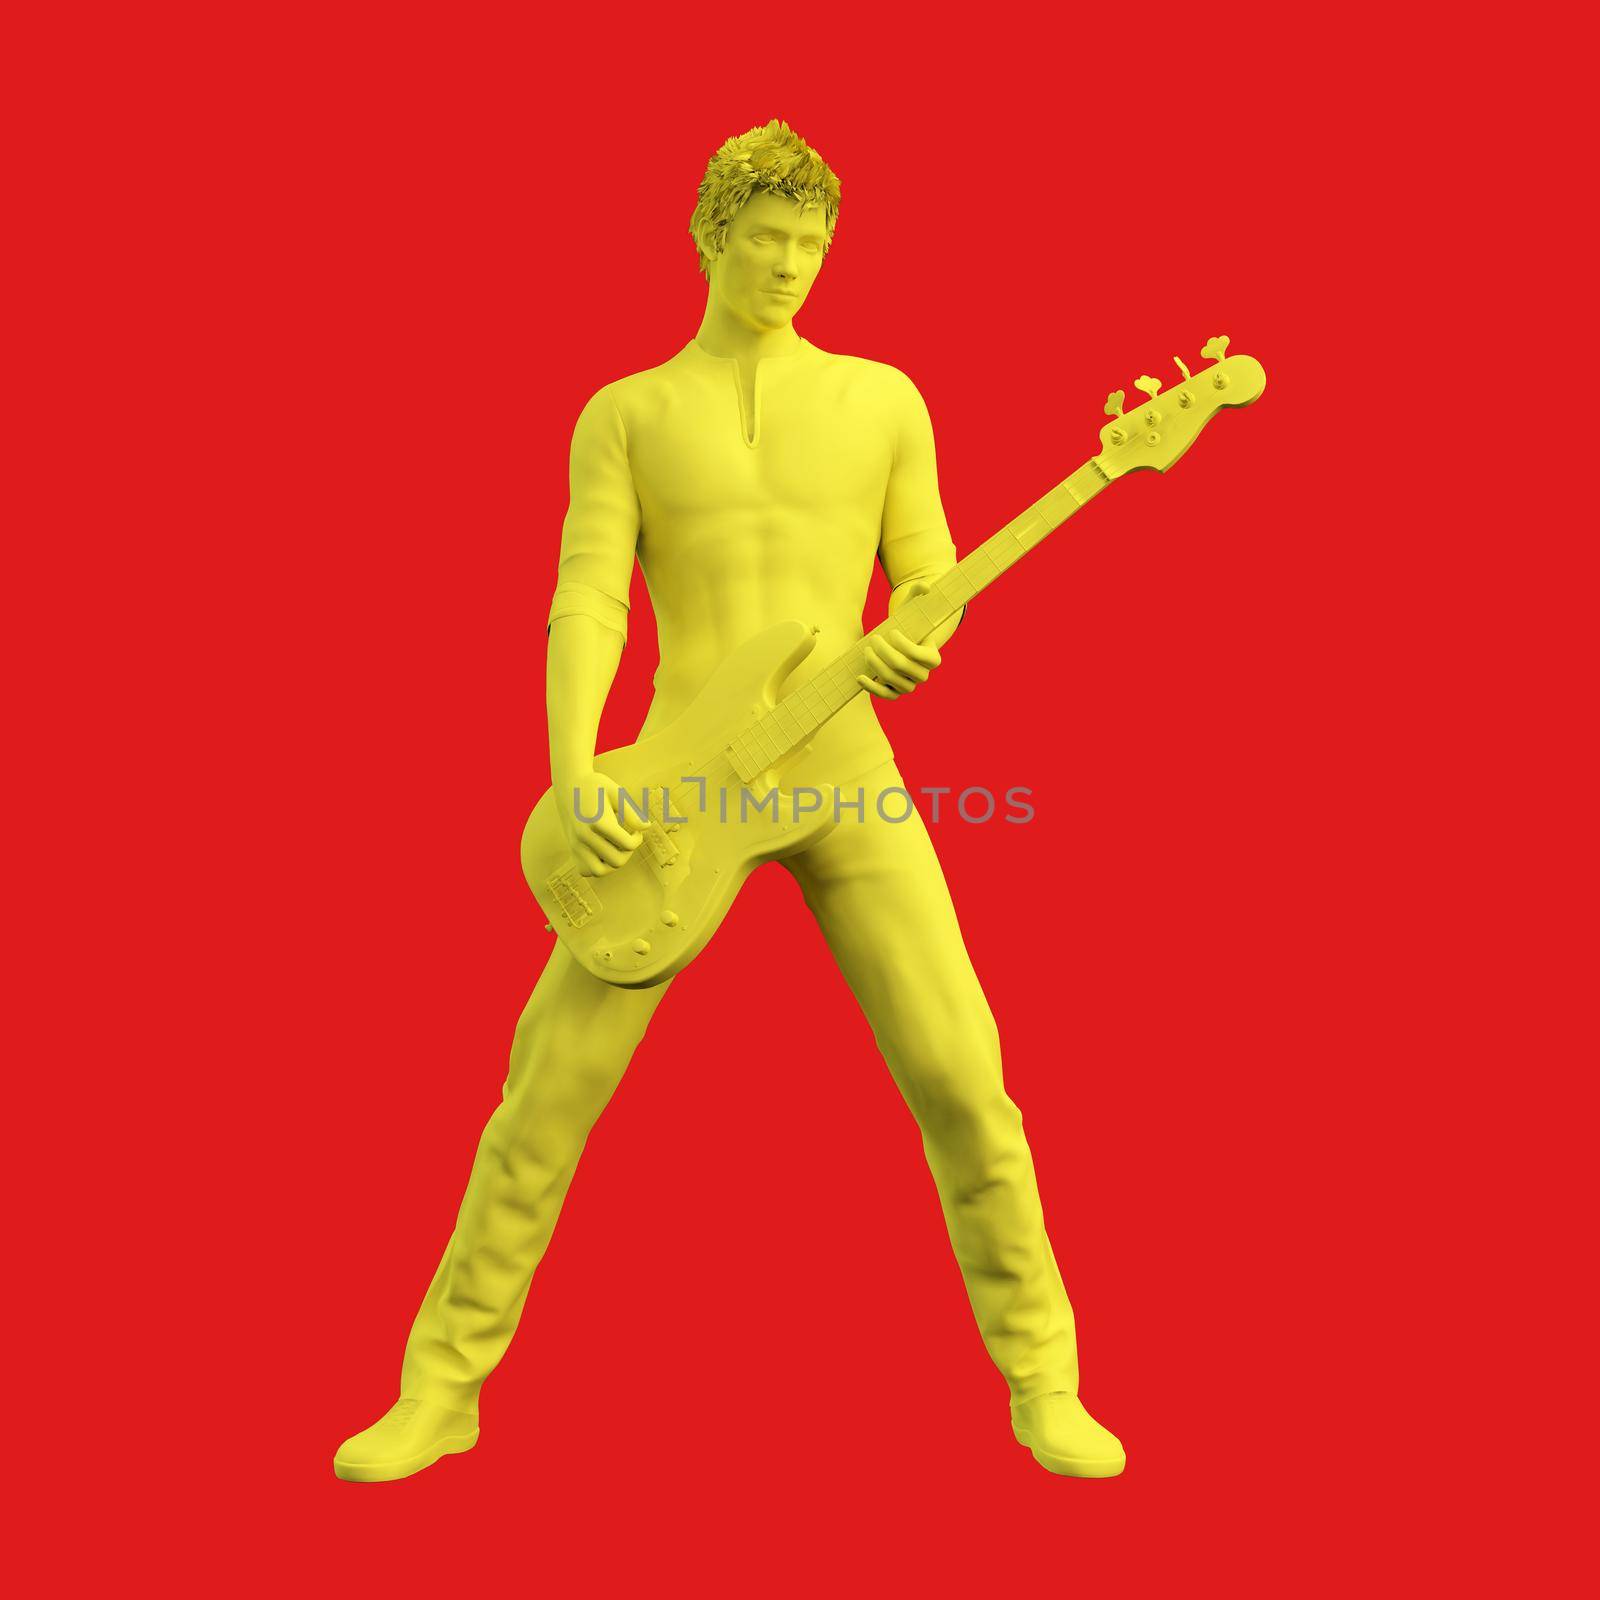 Bass Player Musician Playing in Concert Concept